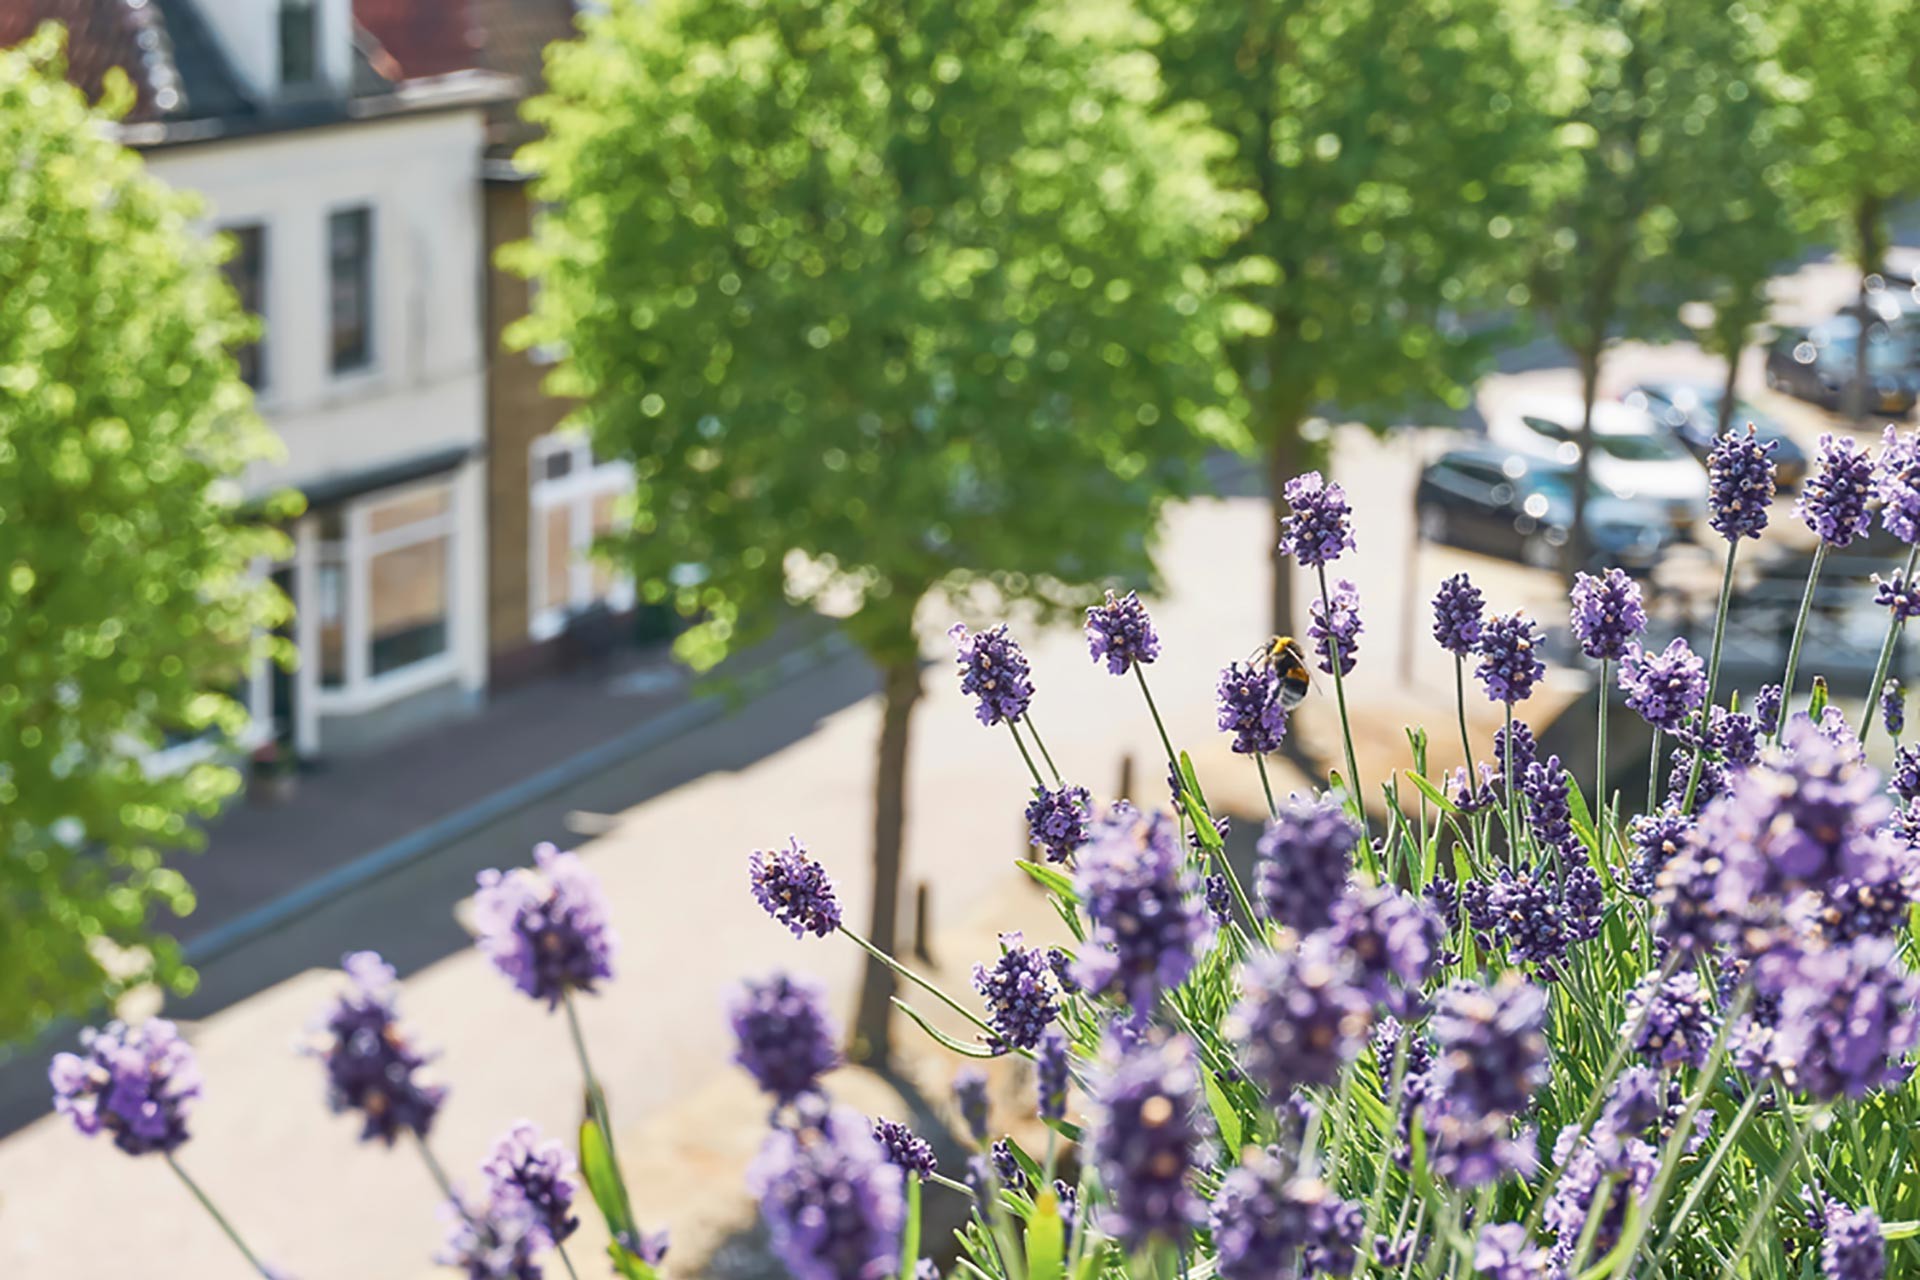 Purple wildflowers at the level of a rooftop or balcony are pollinated by a bee in the foreground. In the background lower down is a street lined with trees, homes, and parked cars.